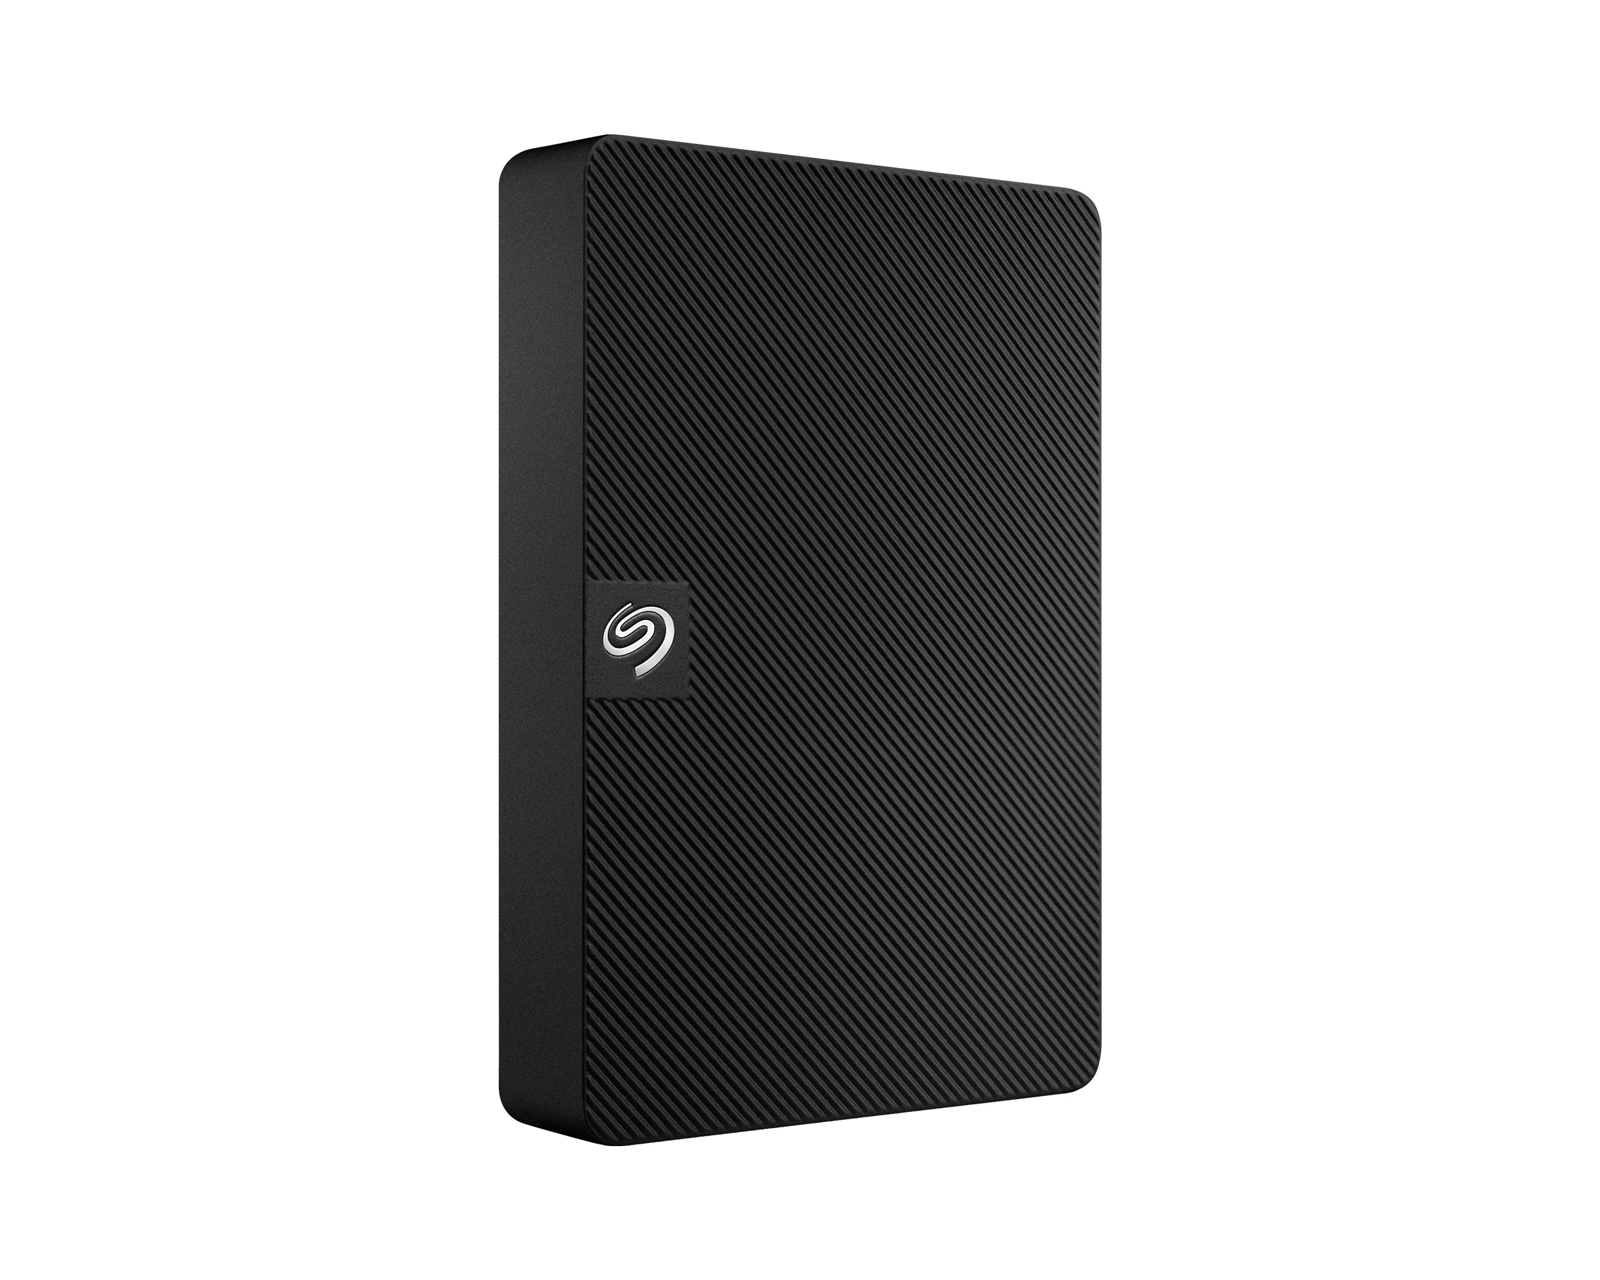 Disque dur externe 2To USB 3.0 Seagate Expansion portable HDD